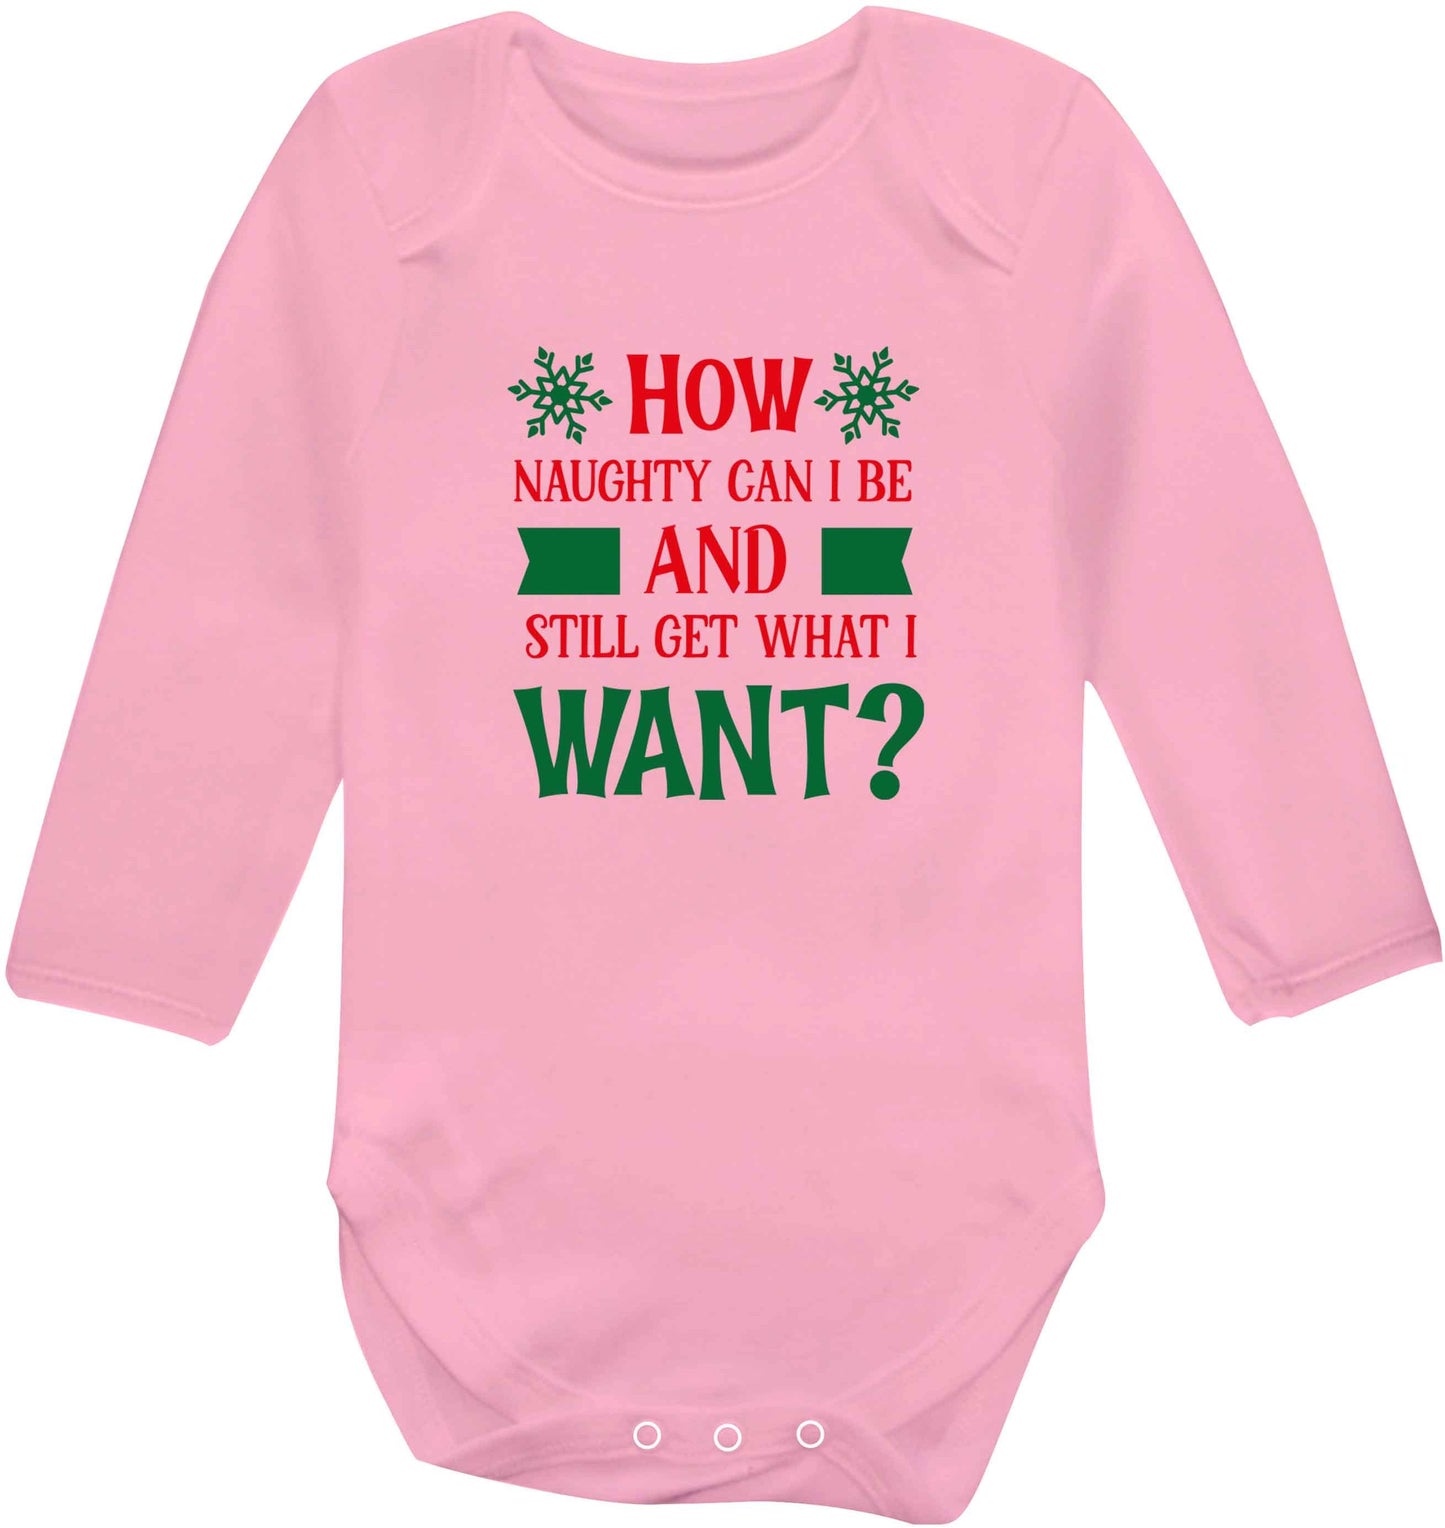 How naughty can I be and still get what I want? baby vest long sleeved pale pink 6-12 months